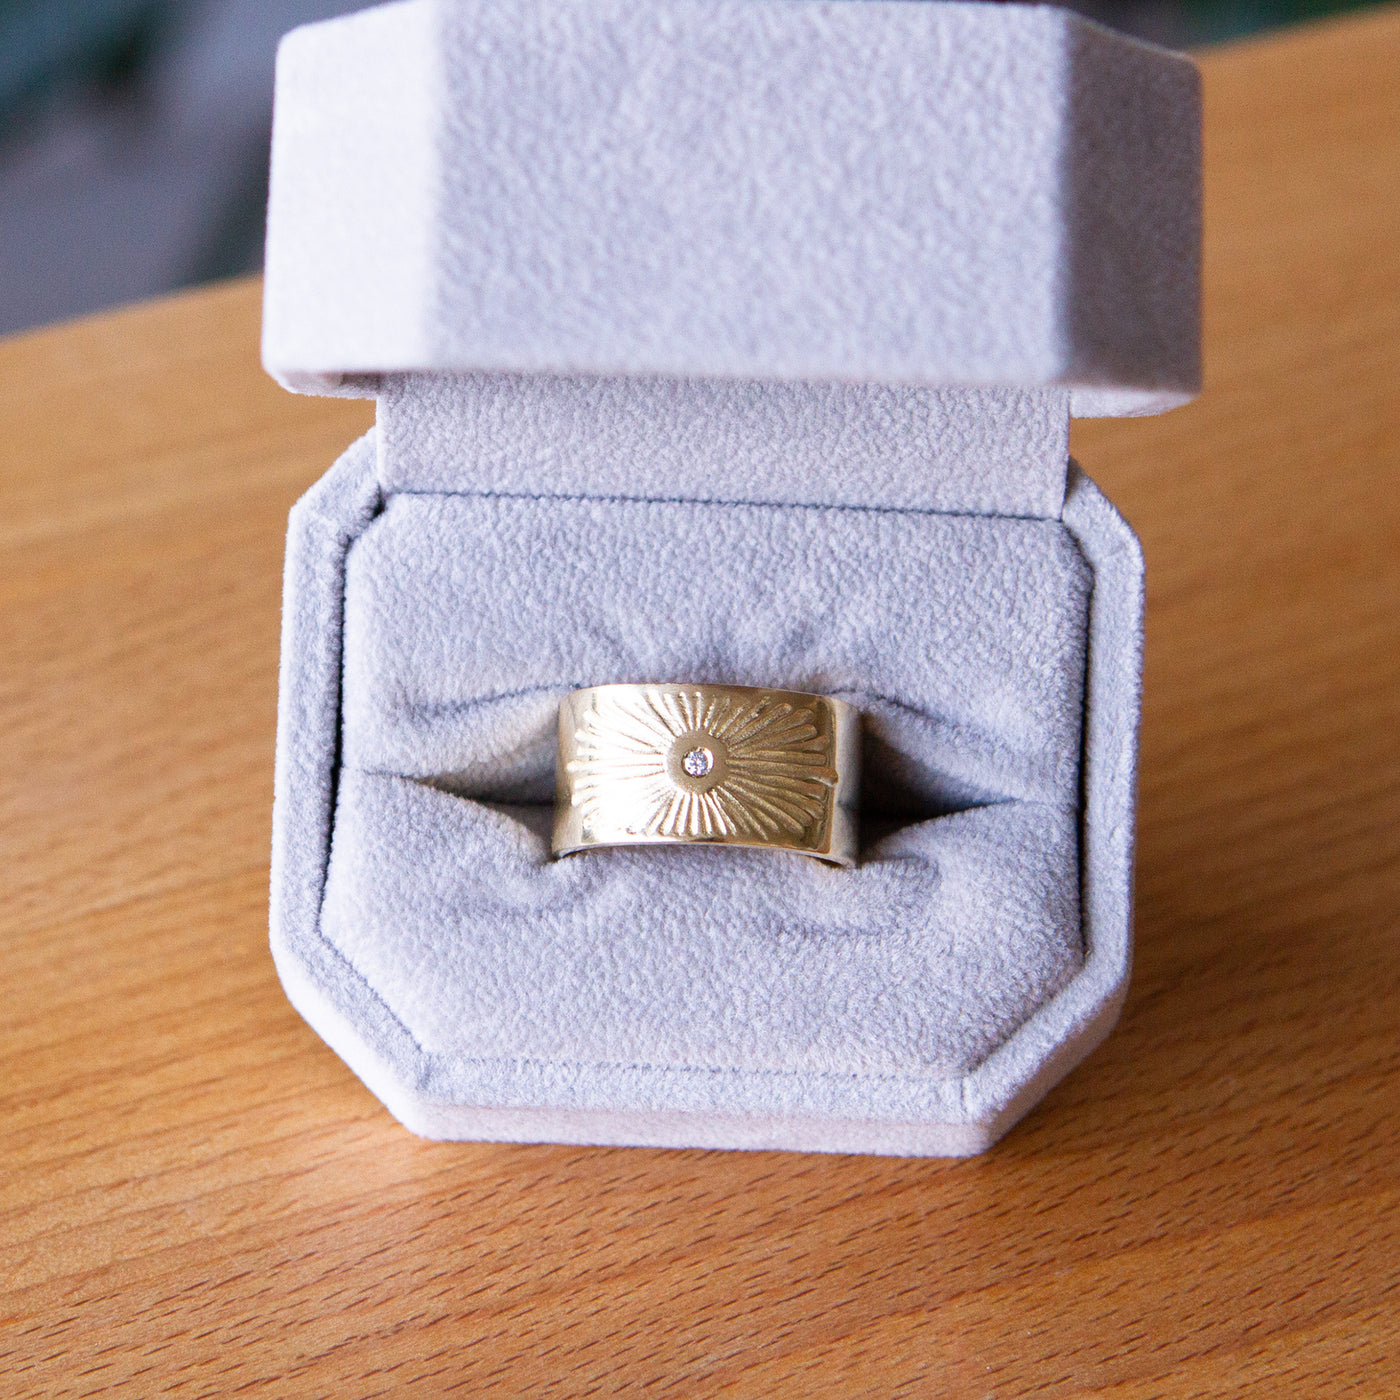 Gold Beacon Band in jewelry box